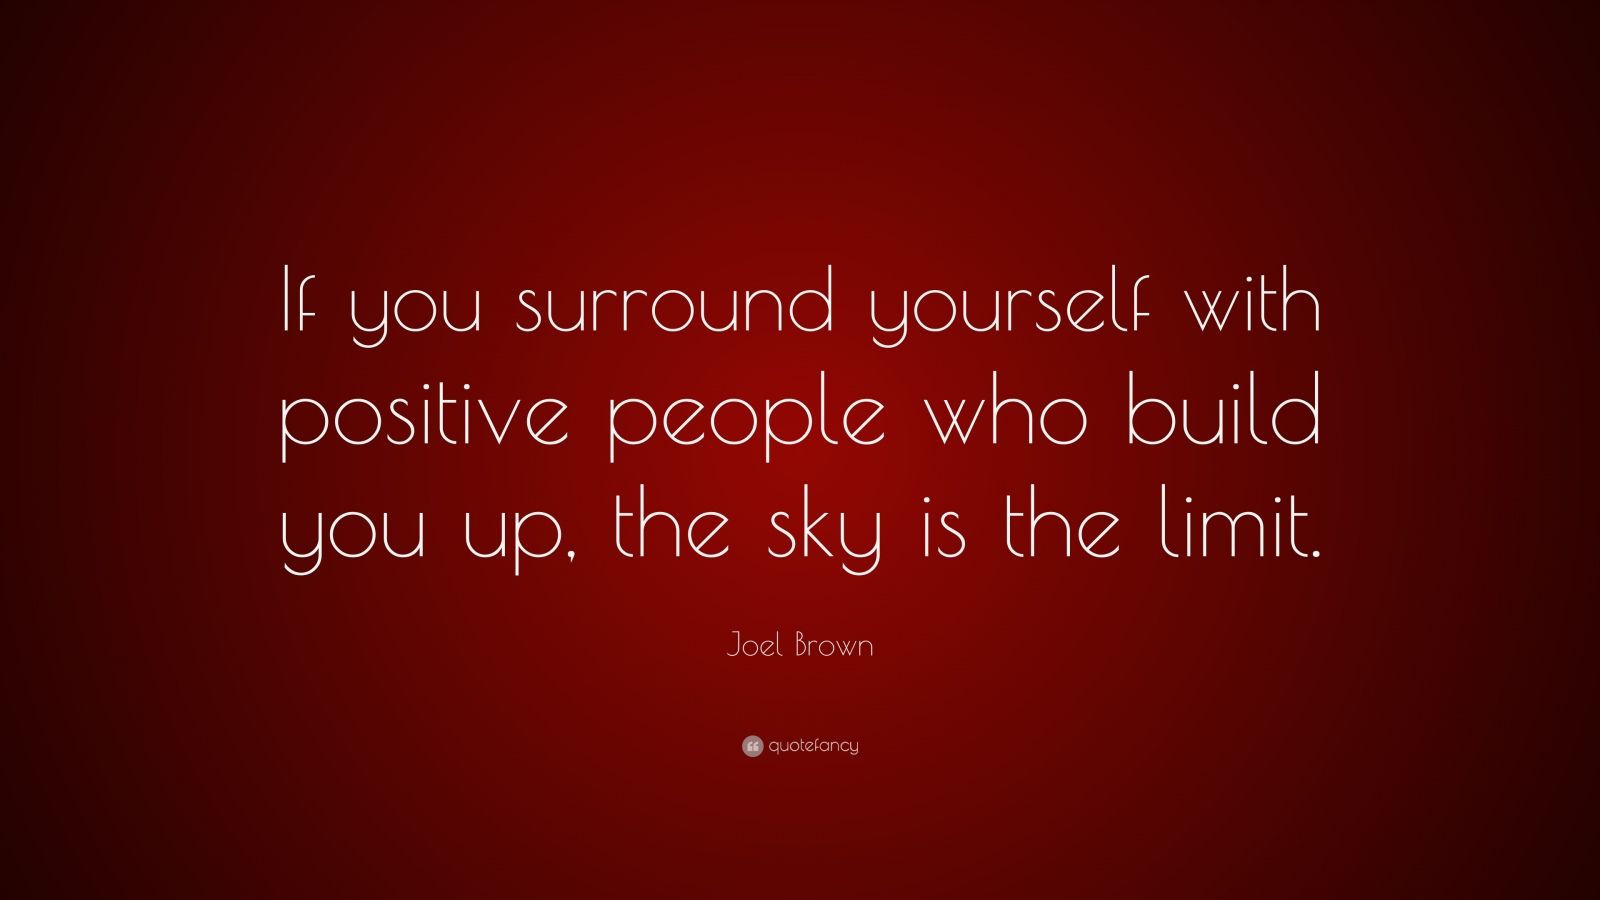 Joel Brown Quote: “If you surround yourself with positive people who